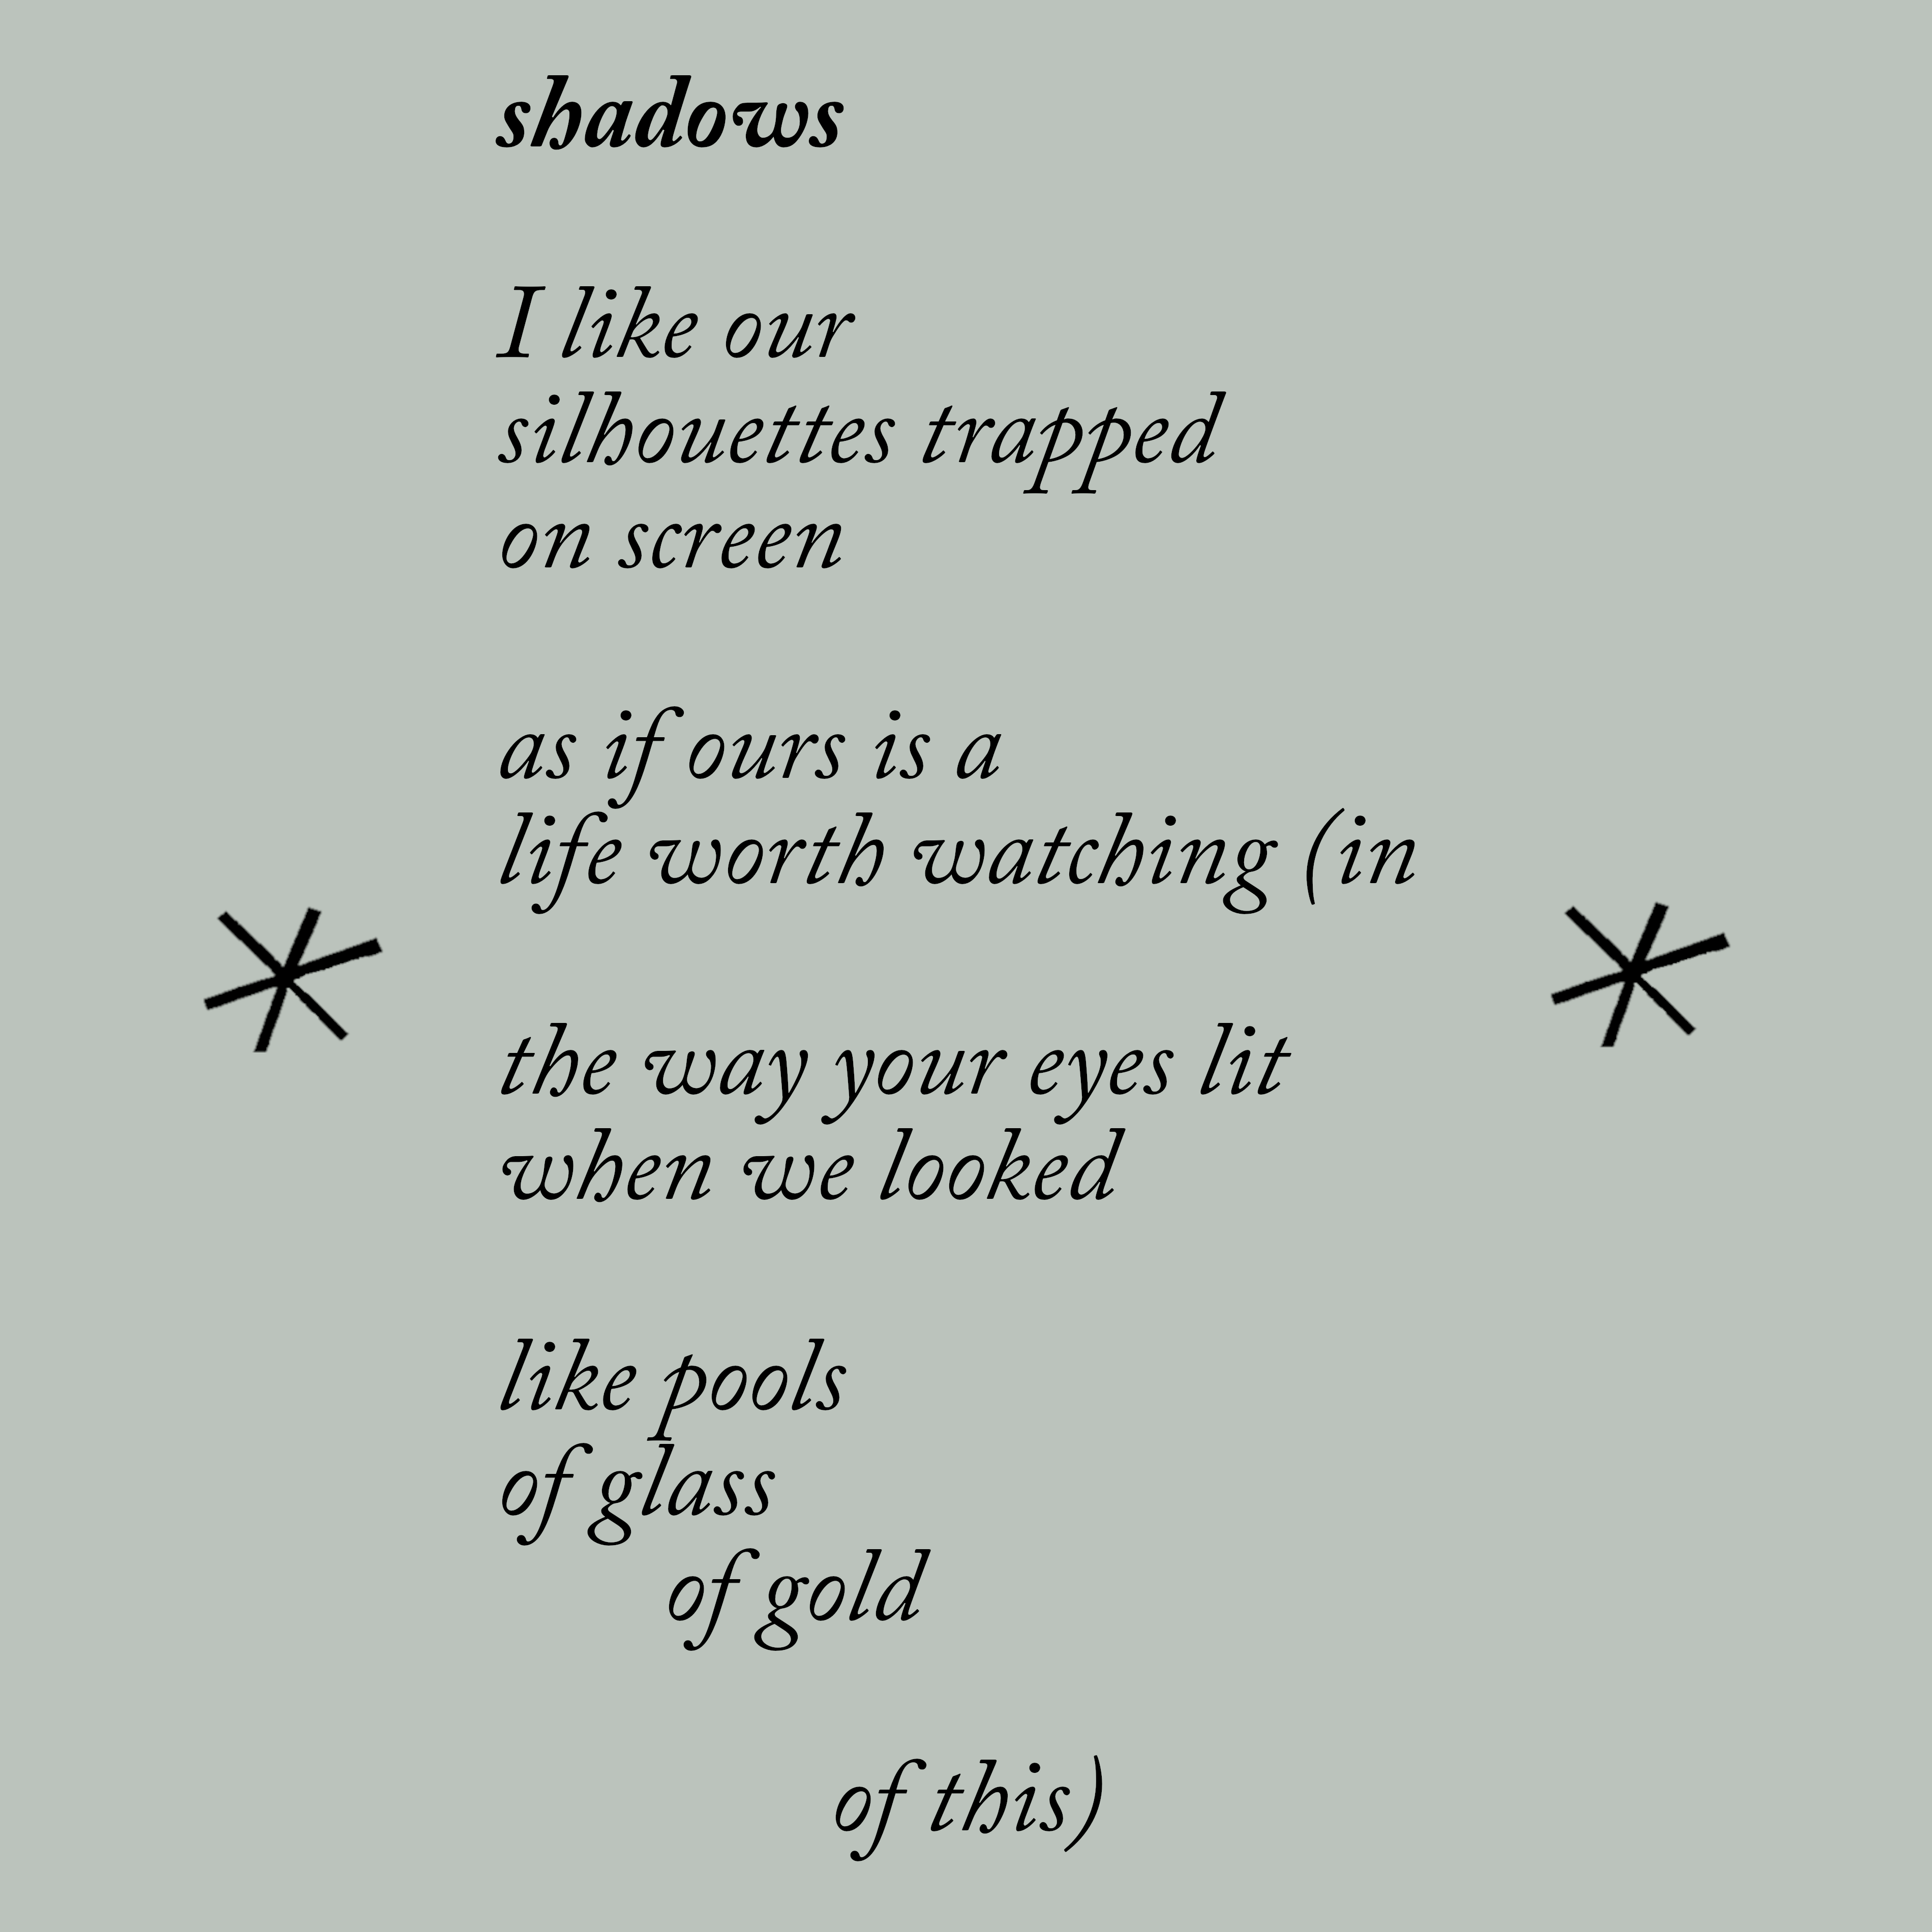 poem text: I like the silhouettes trapped on screen as if ours is a life worth watching (in the way your eyes lit when we looked like pool of glass of gold of this)